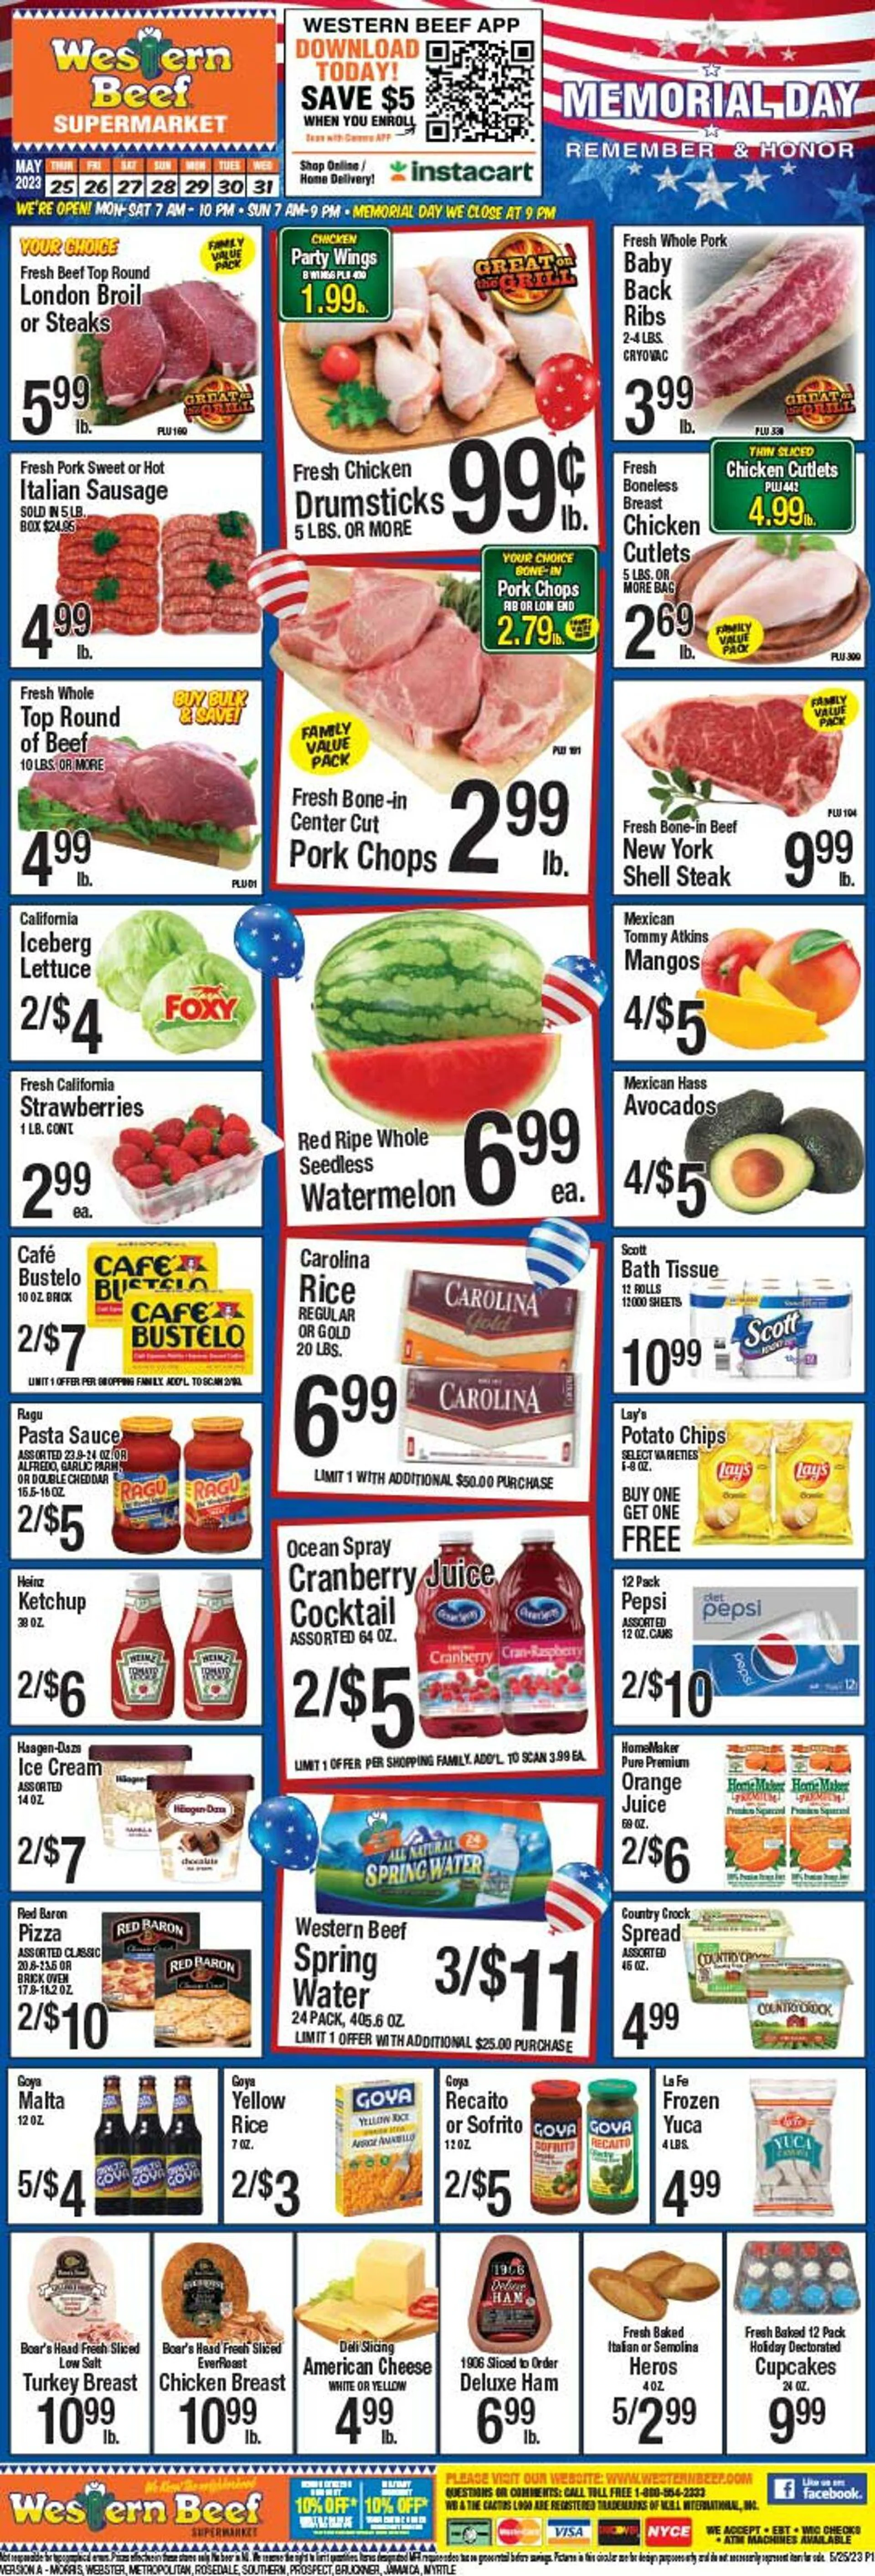 Western Beef Current weekly ad - 1